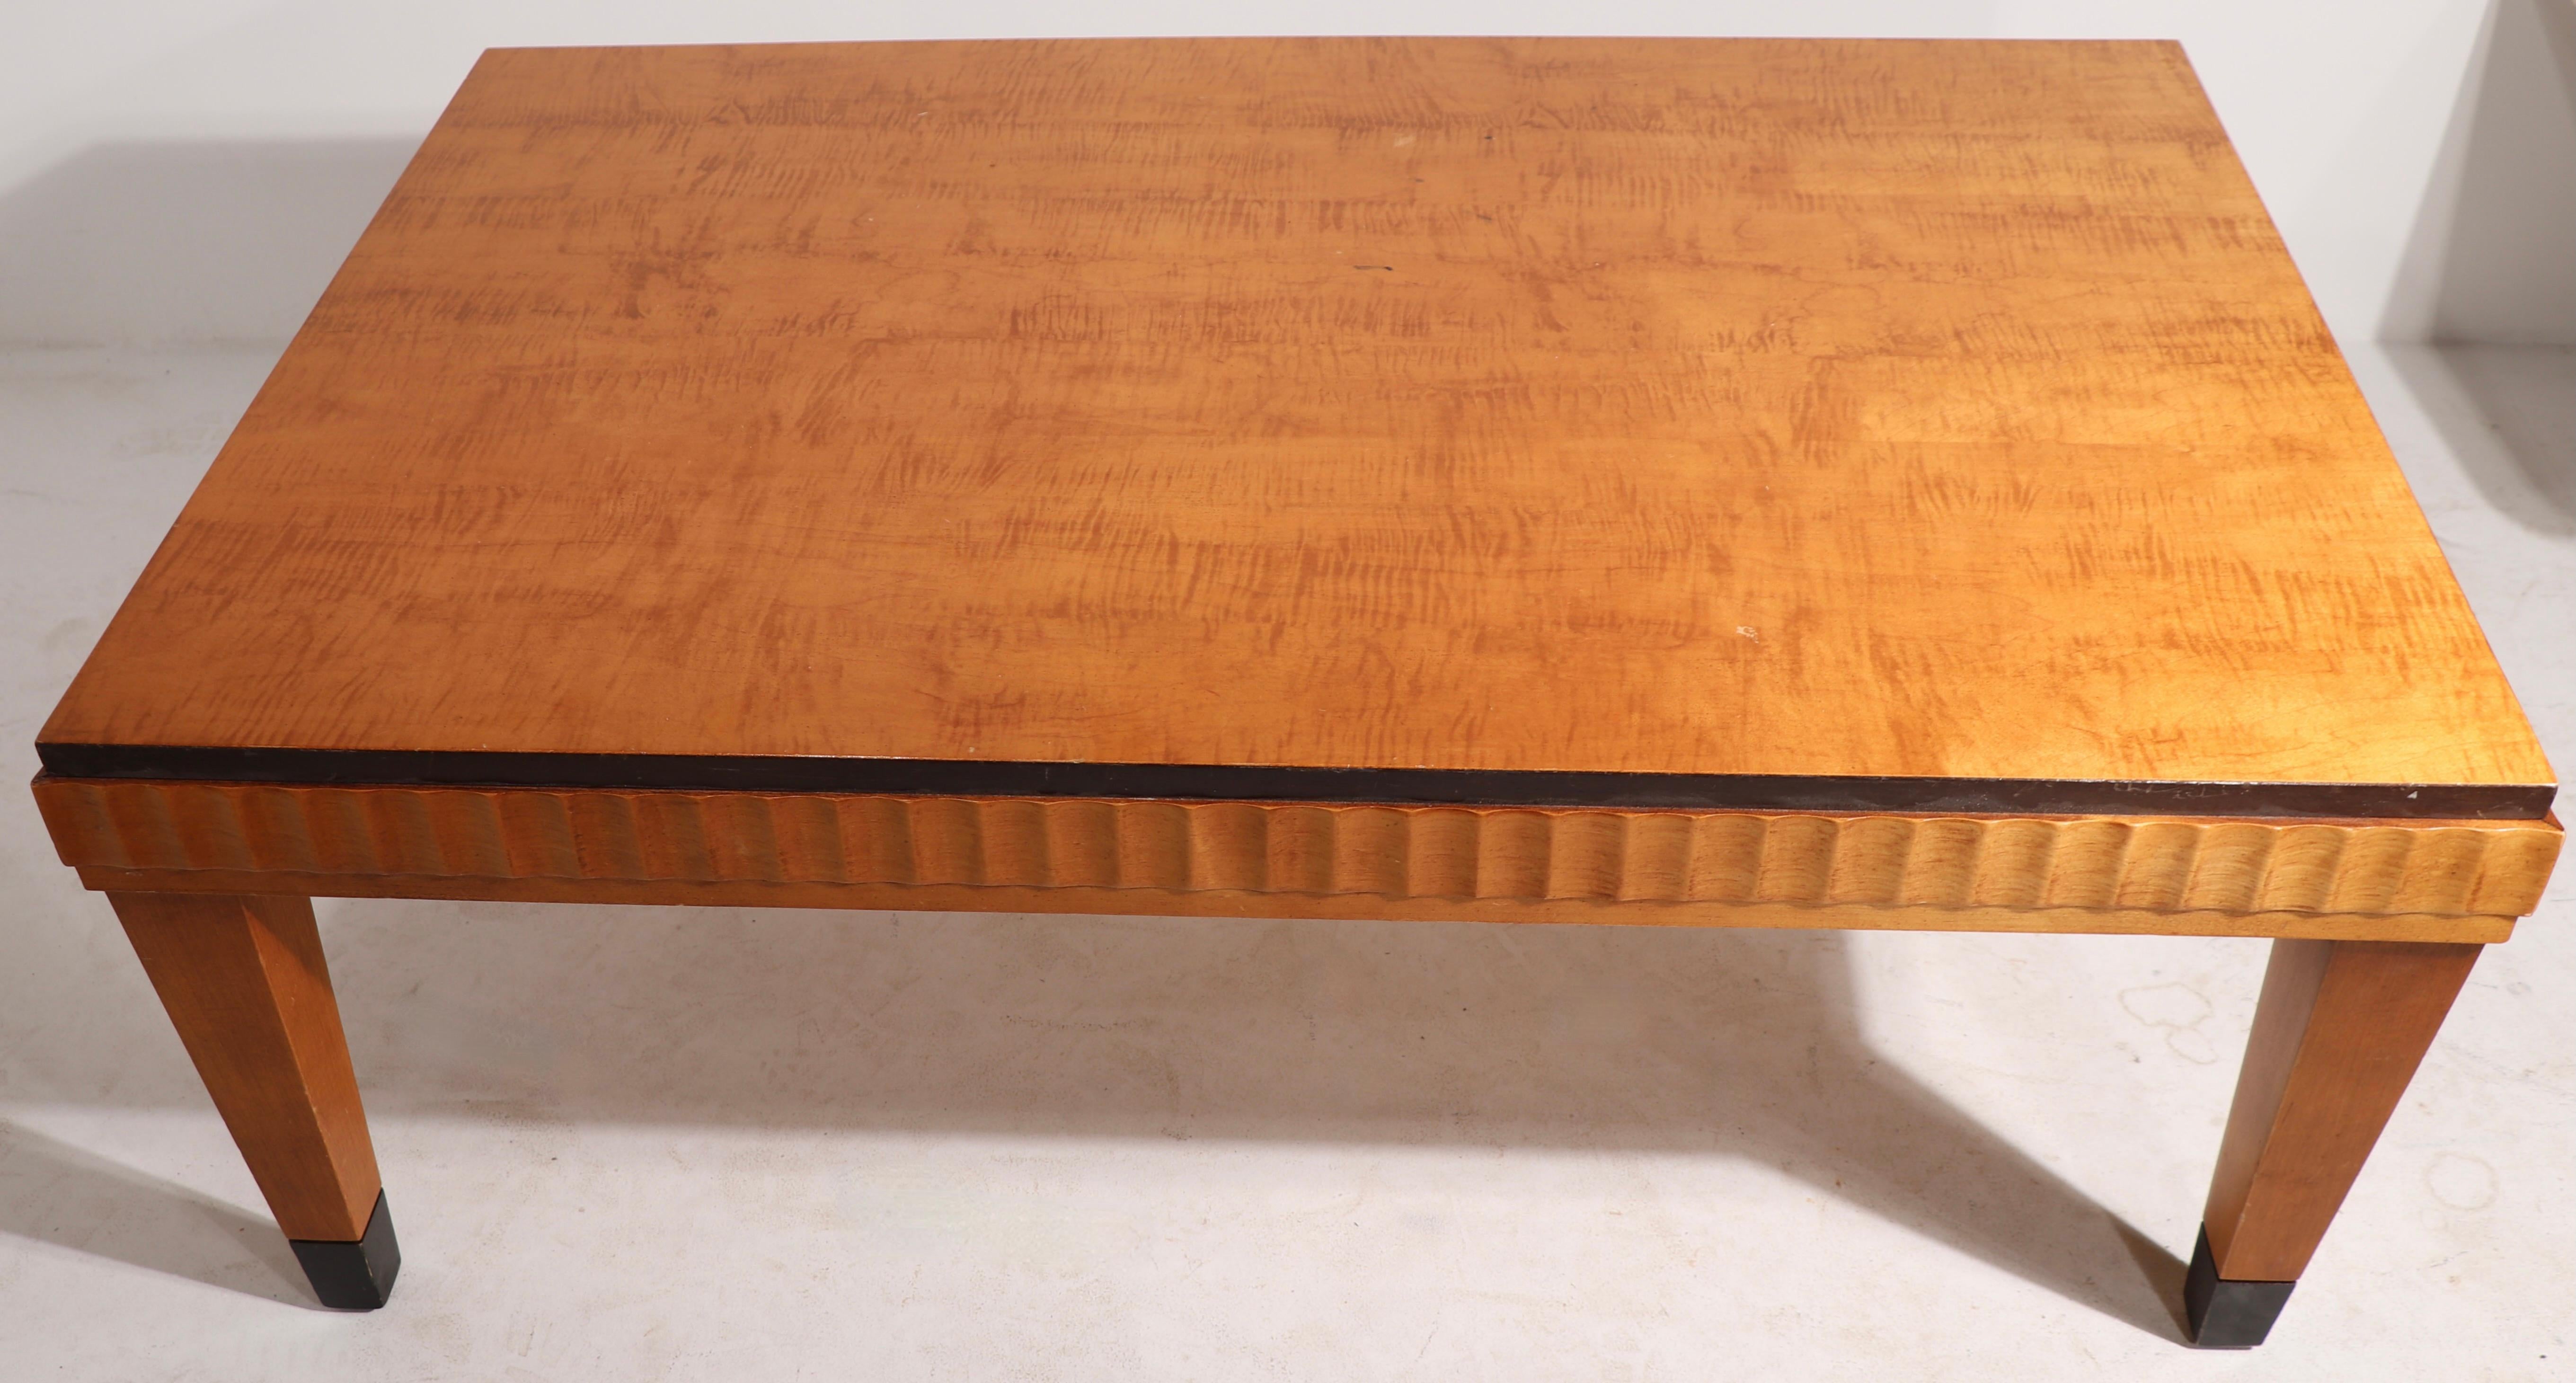 Maple Classical Art Deco Style Coffee Table by Lane